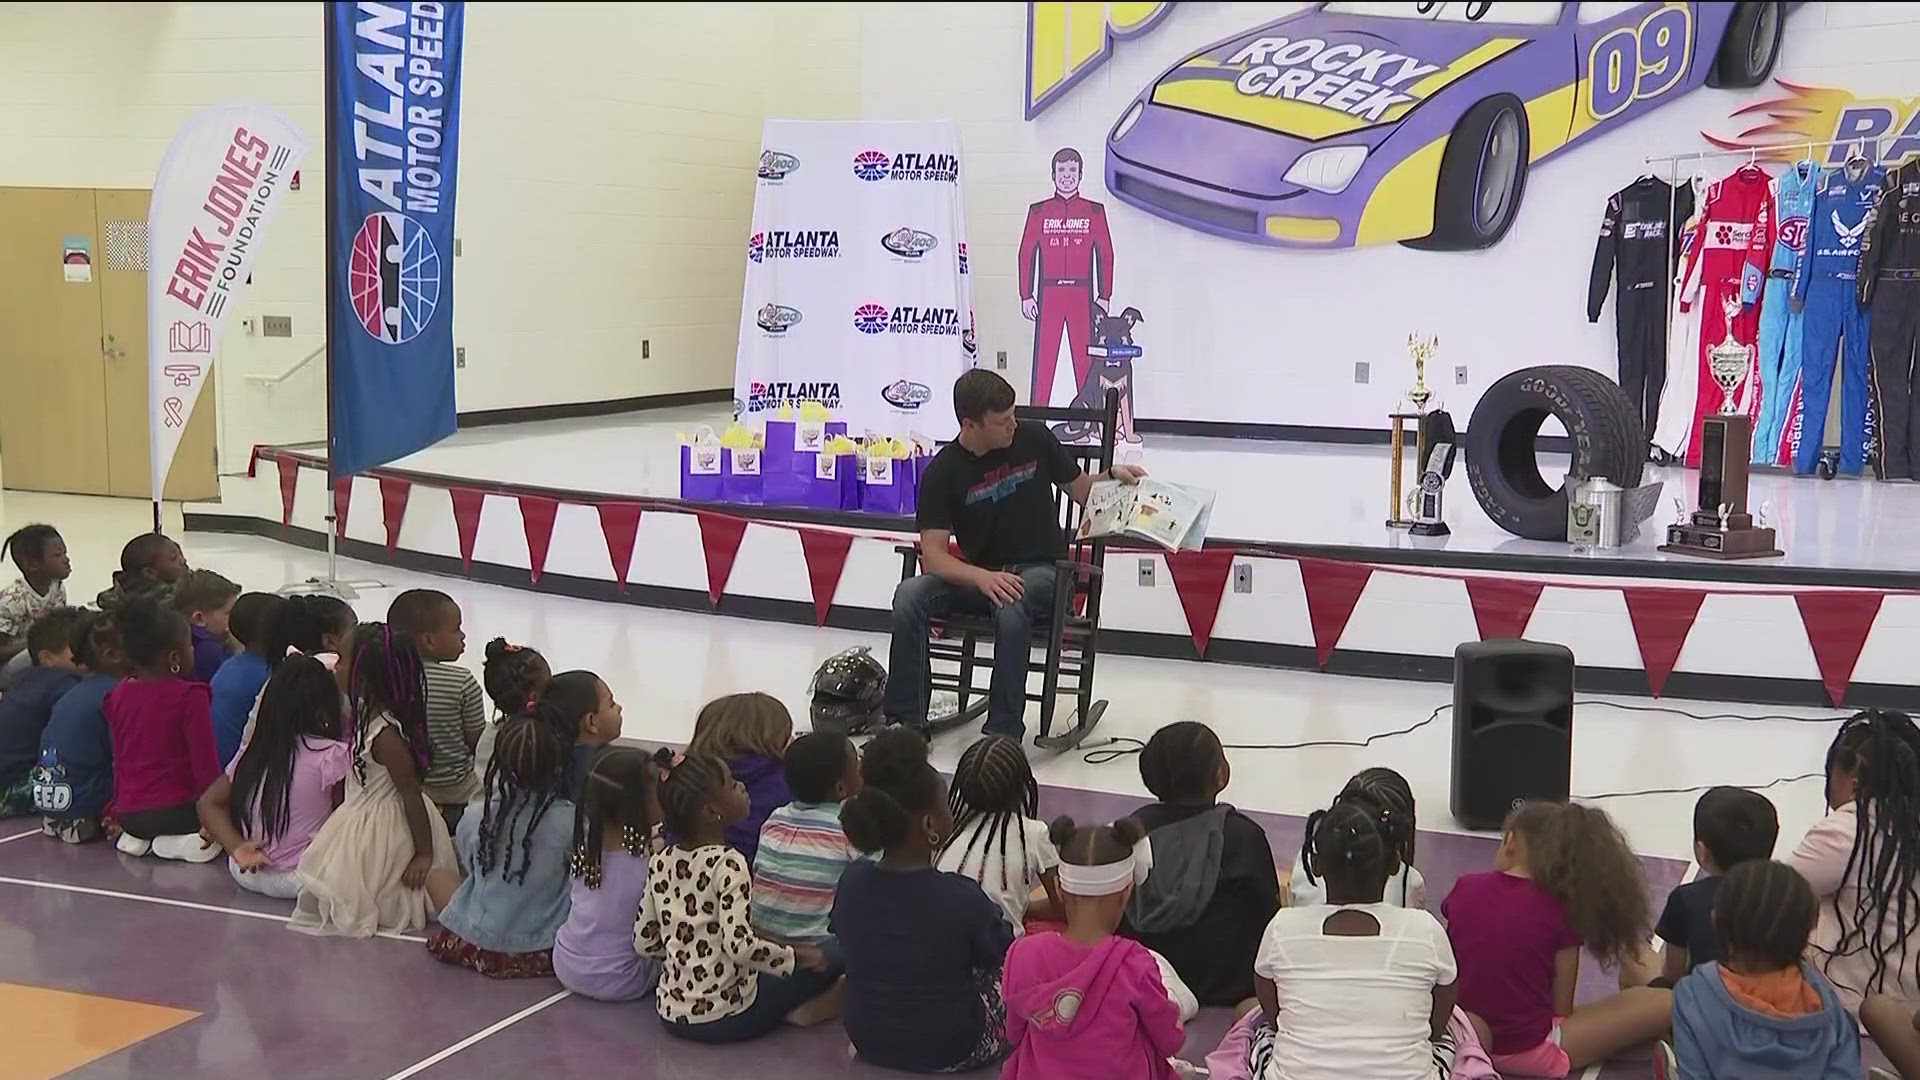 This summer, one NASCAR driver is focusing a little less on speeding and more on reading.